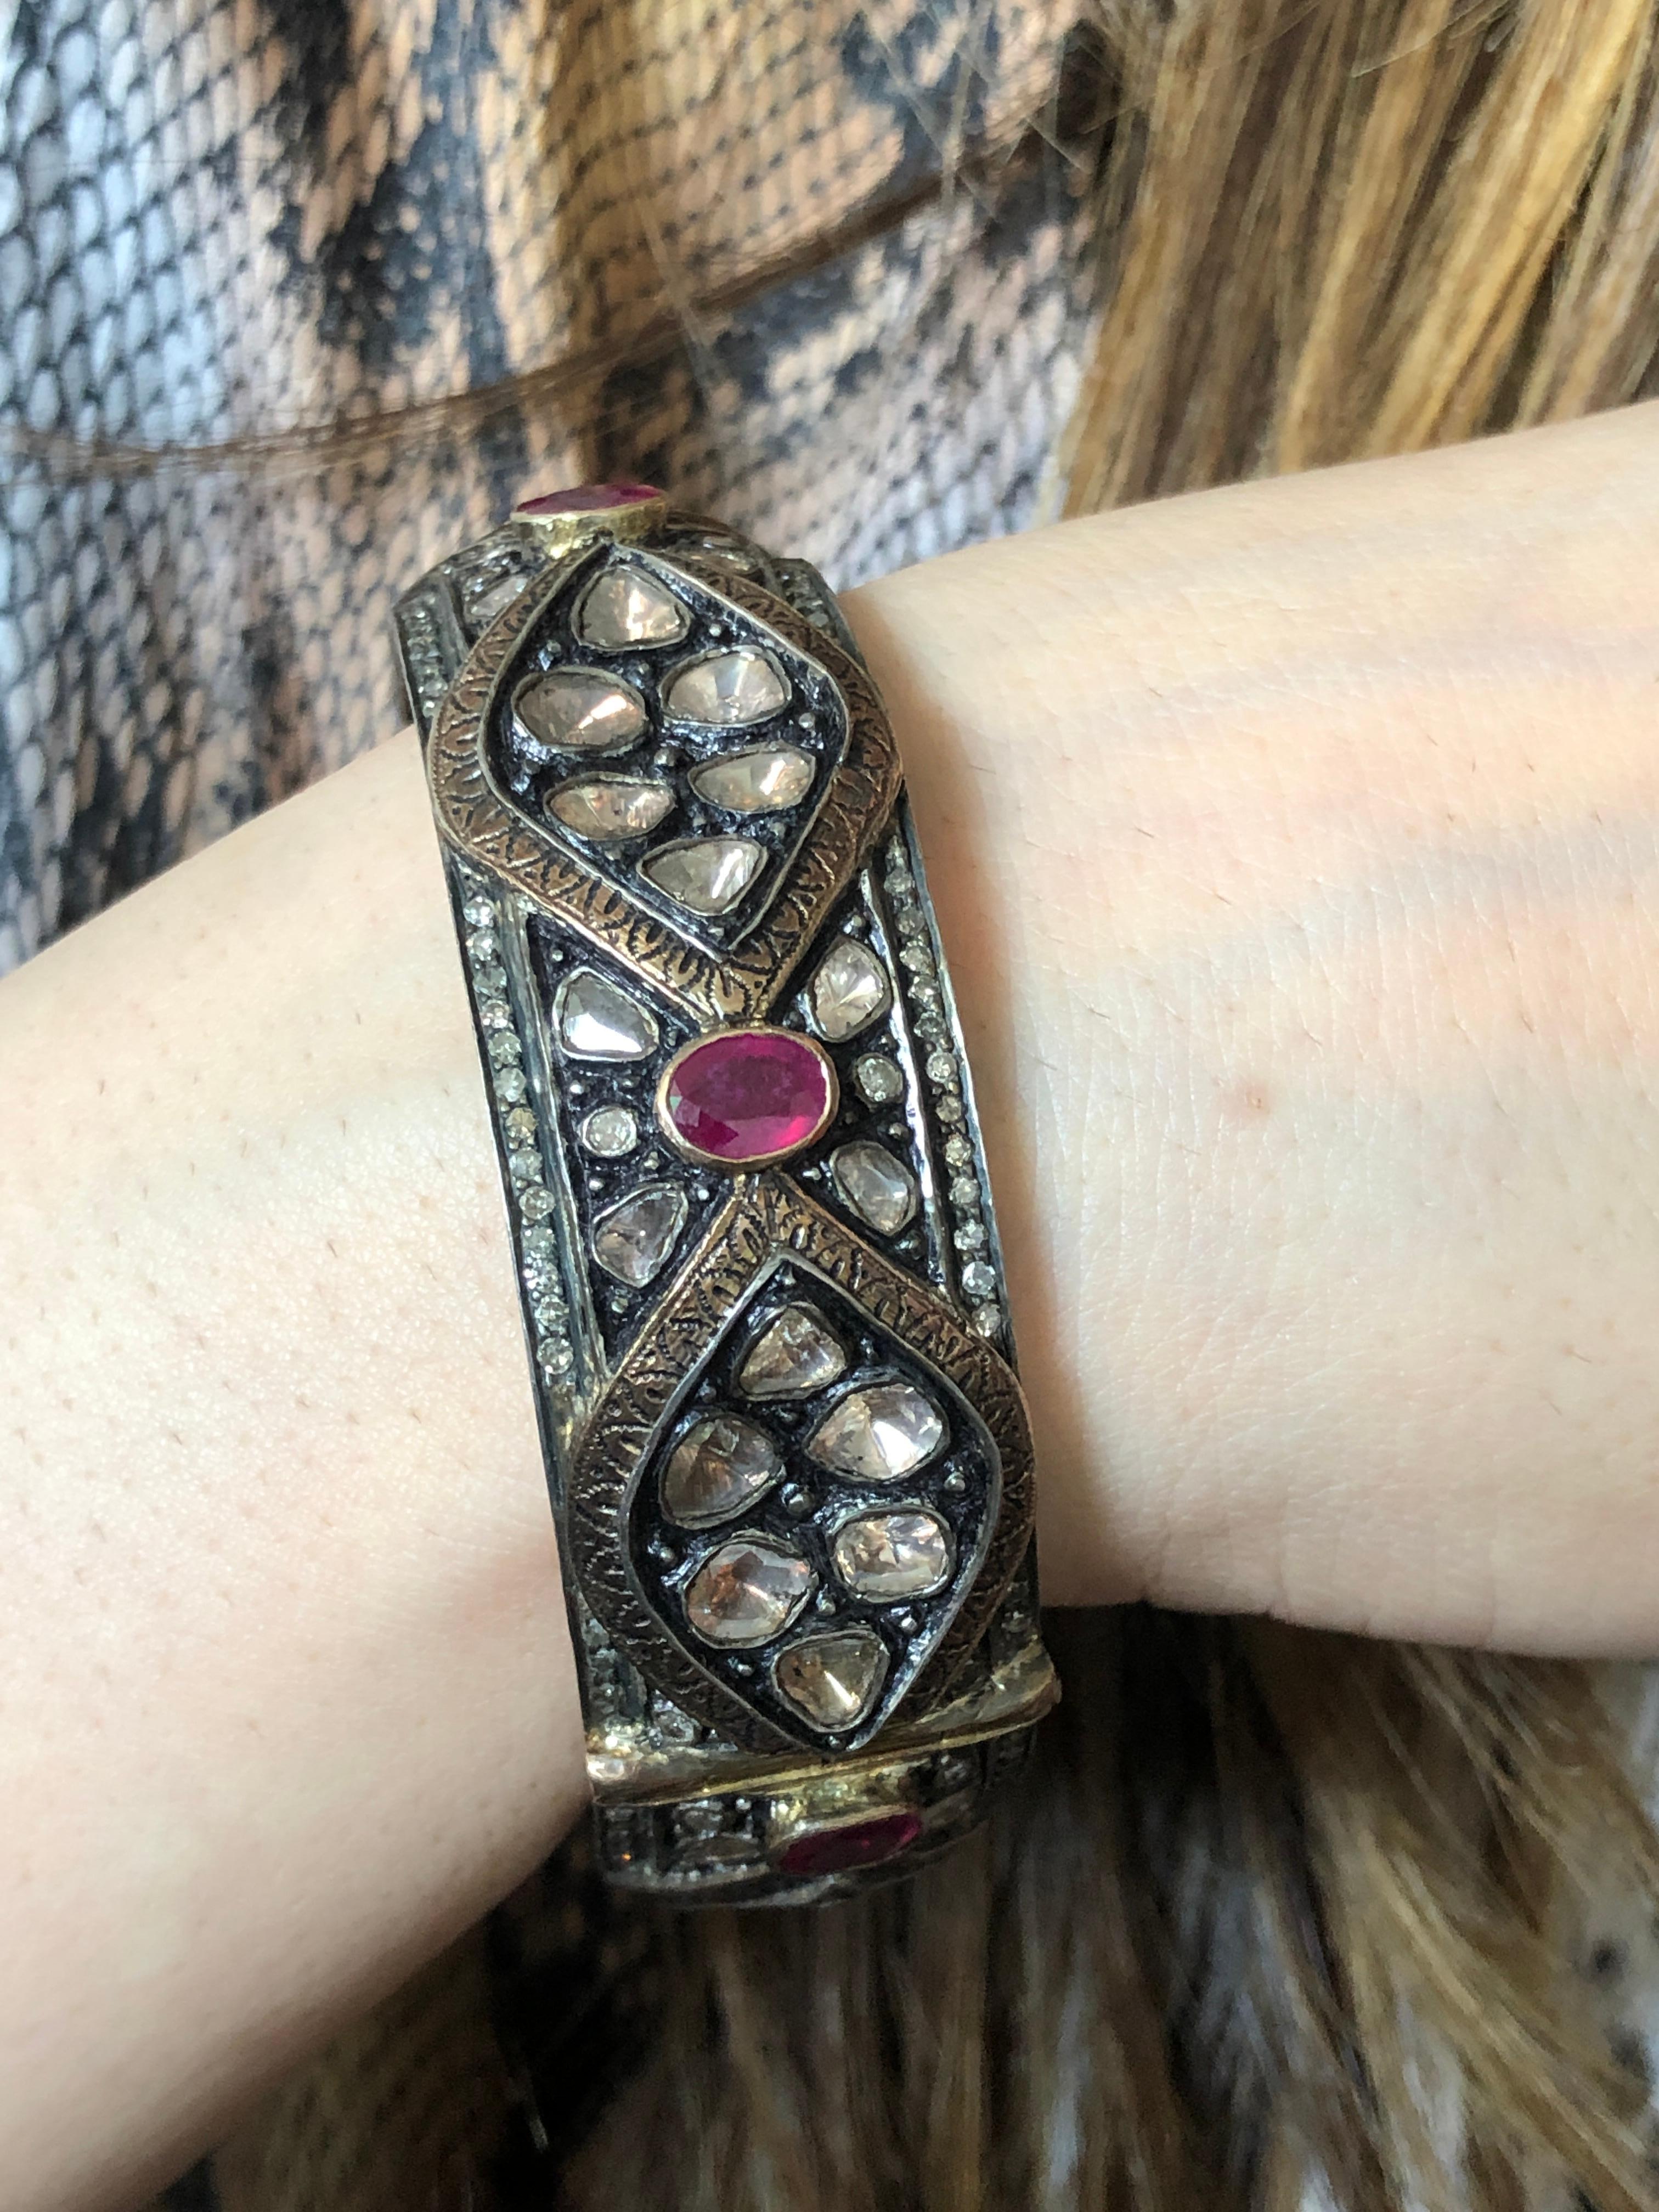 Diamond: 9.50 carats 
Ruby: 5.55 carats
Item Code: DBR BH
Size: 2.25 inches

The perfect addition to any look!
This enchanting 14k Gold bangle studded with Uncut Diamonds and Ruby in sterling silver is as versatile as it looks 


